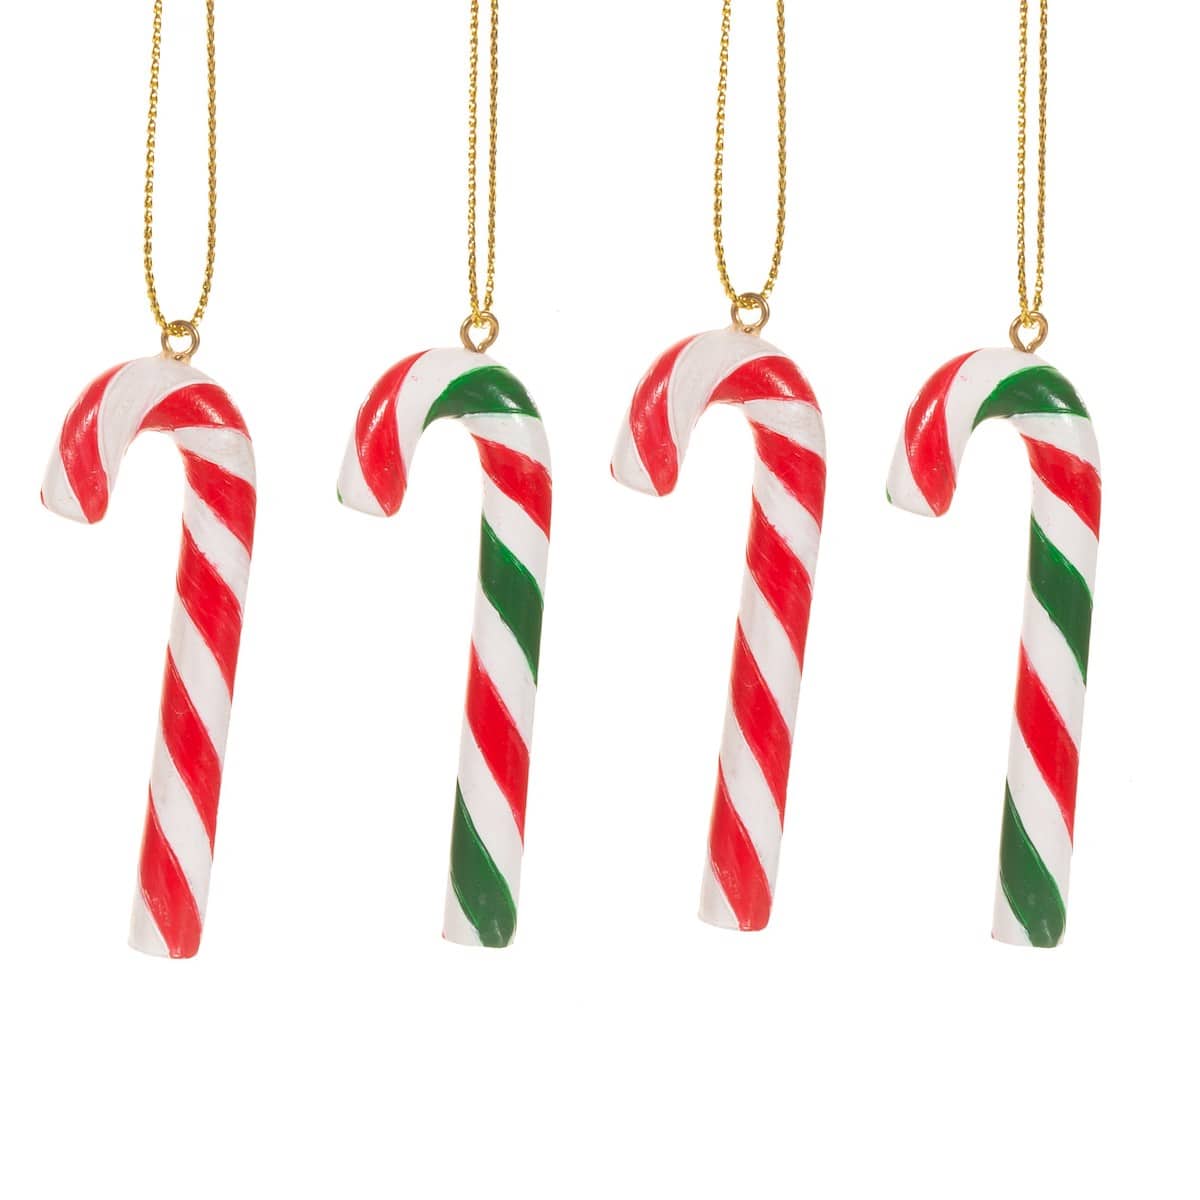 Sass & Belle Christmas Decorations Set of 4 Candy Cane Christmas Tree Decorations